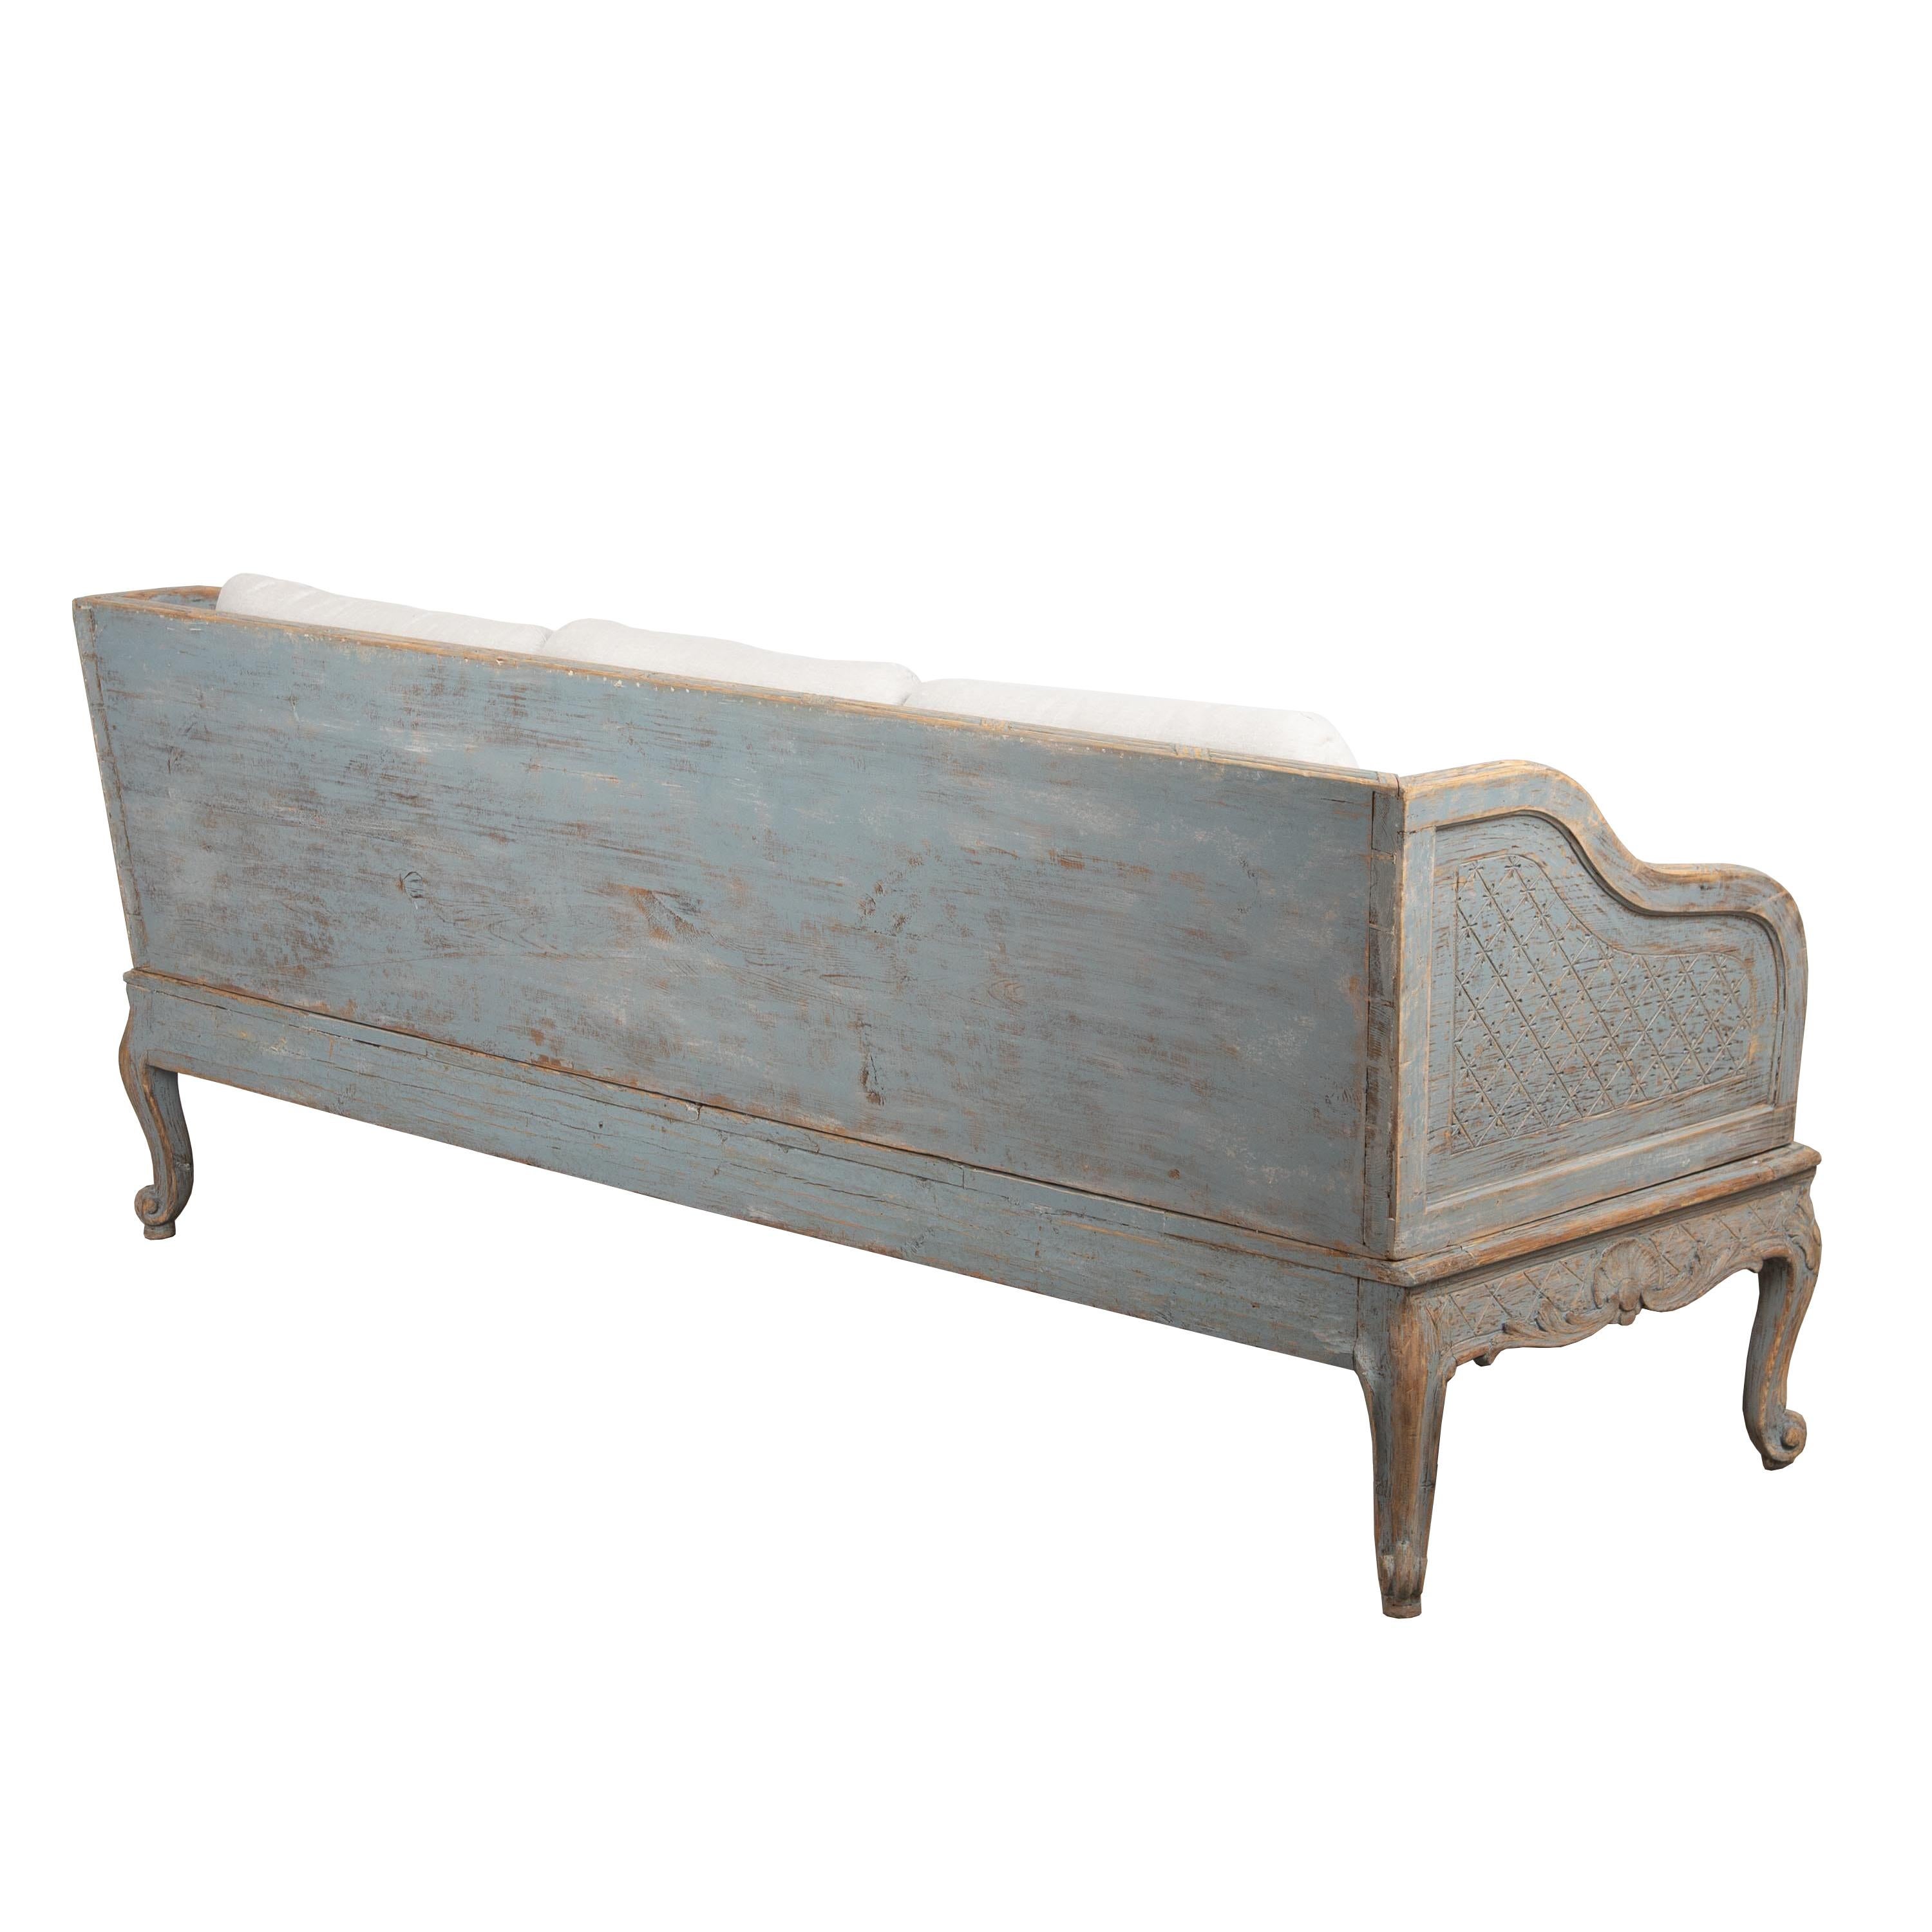 Period Rococo Sofa from Stockholm In Good Condition For Sale In Tetbury, Gloucestershire